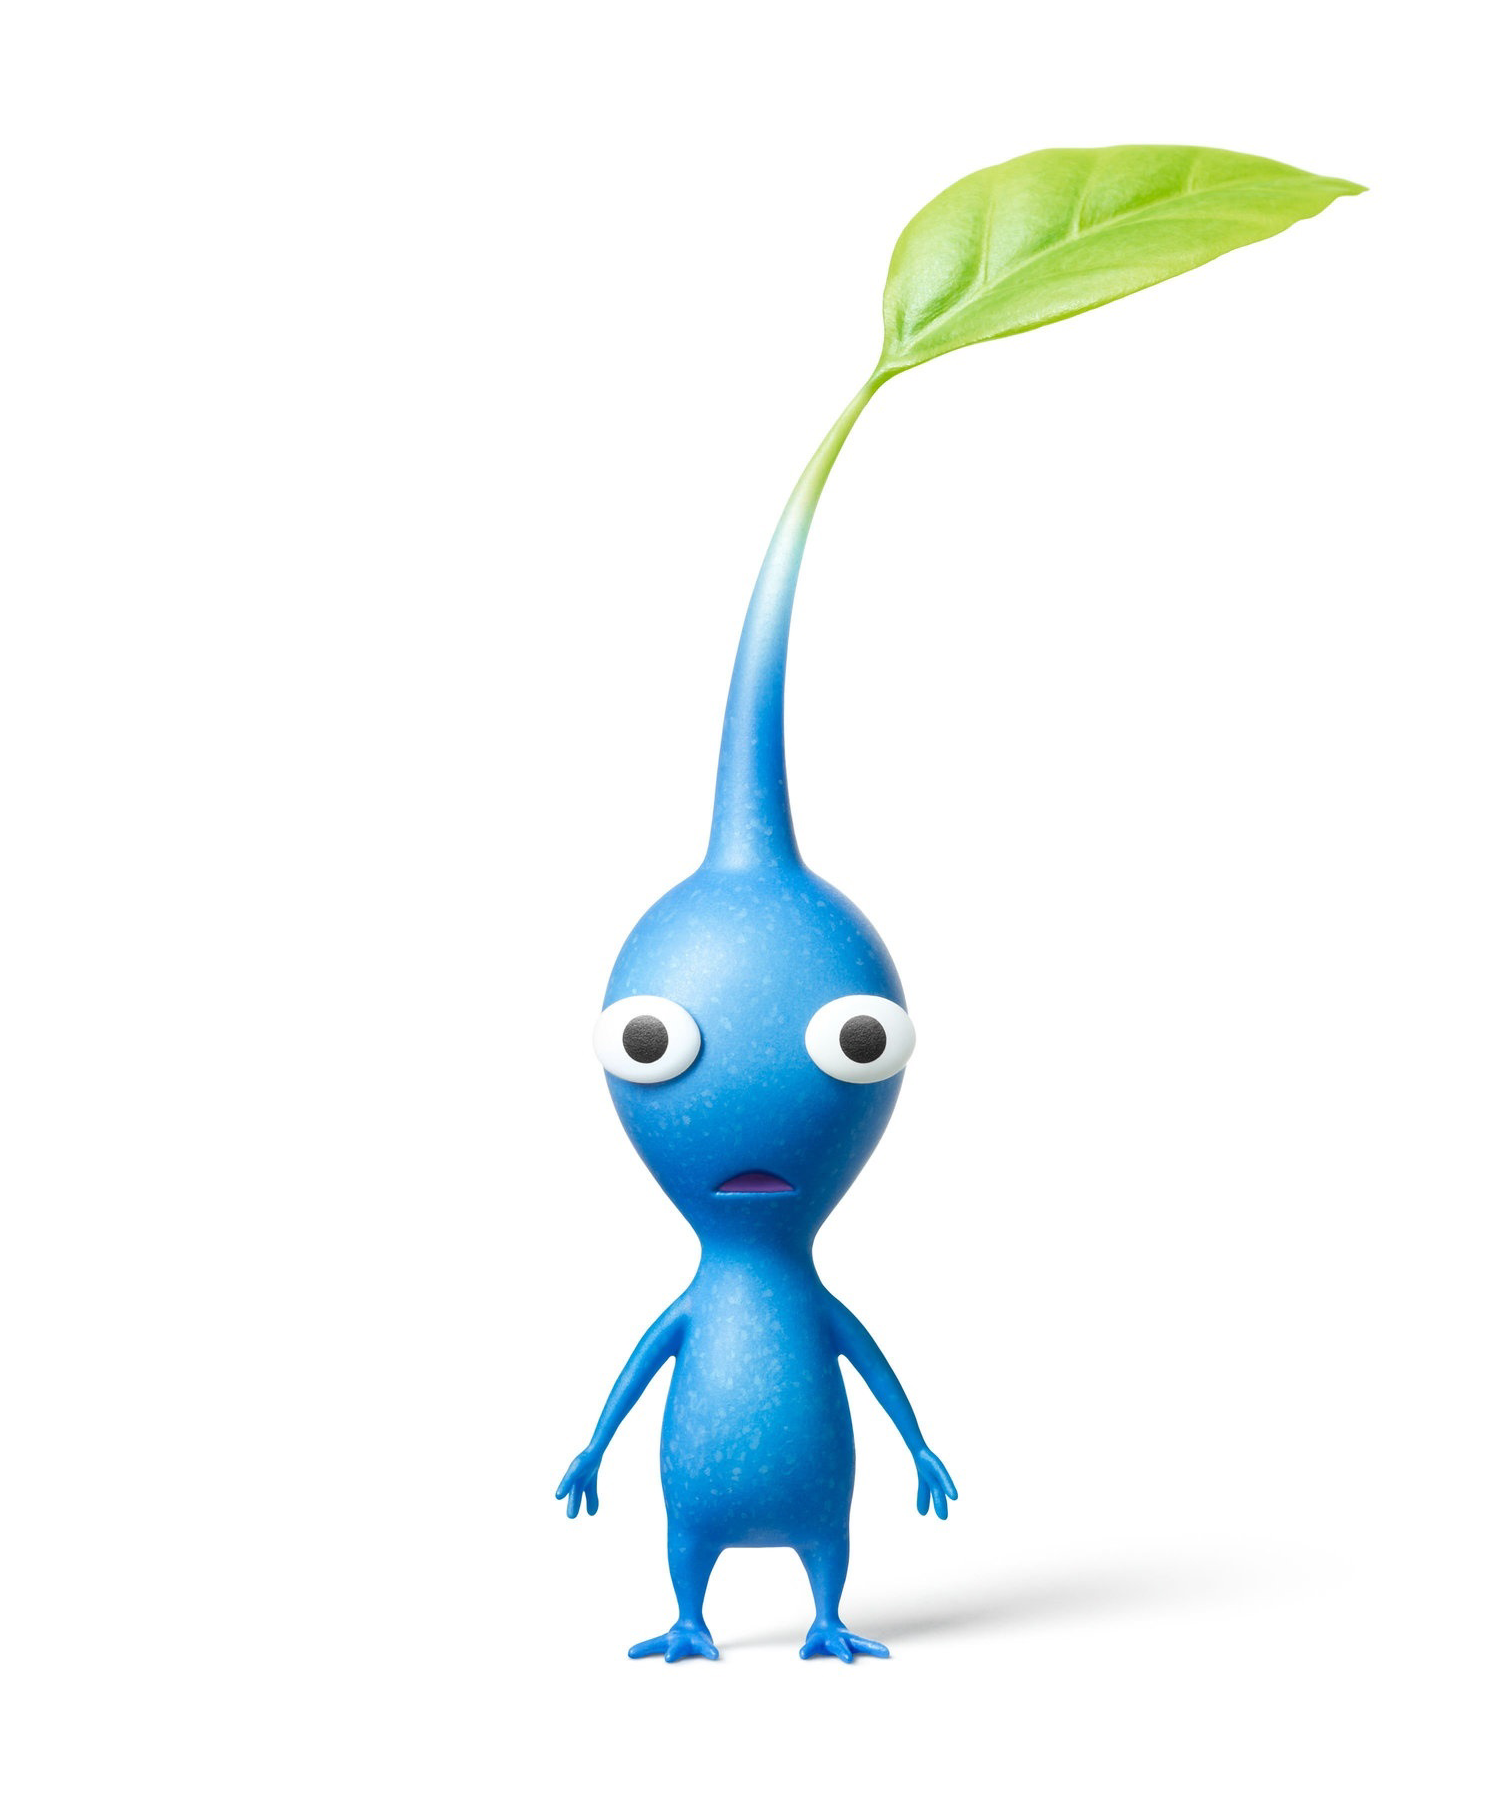 HQ Pikmin Wallpapers | File 461.05Kb